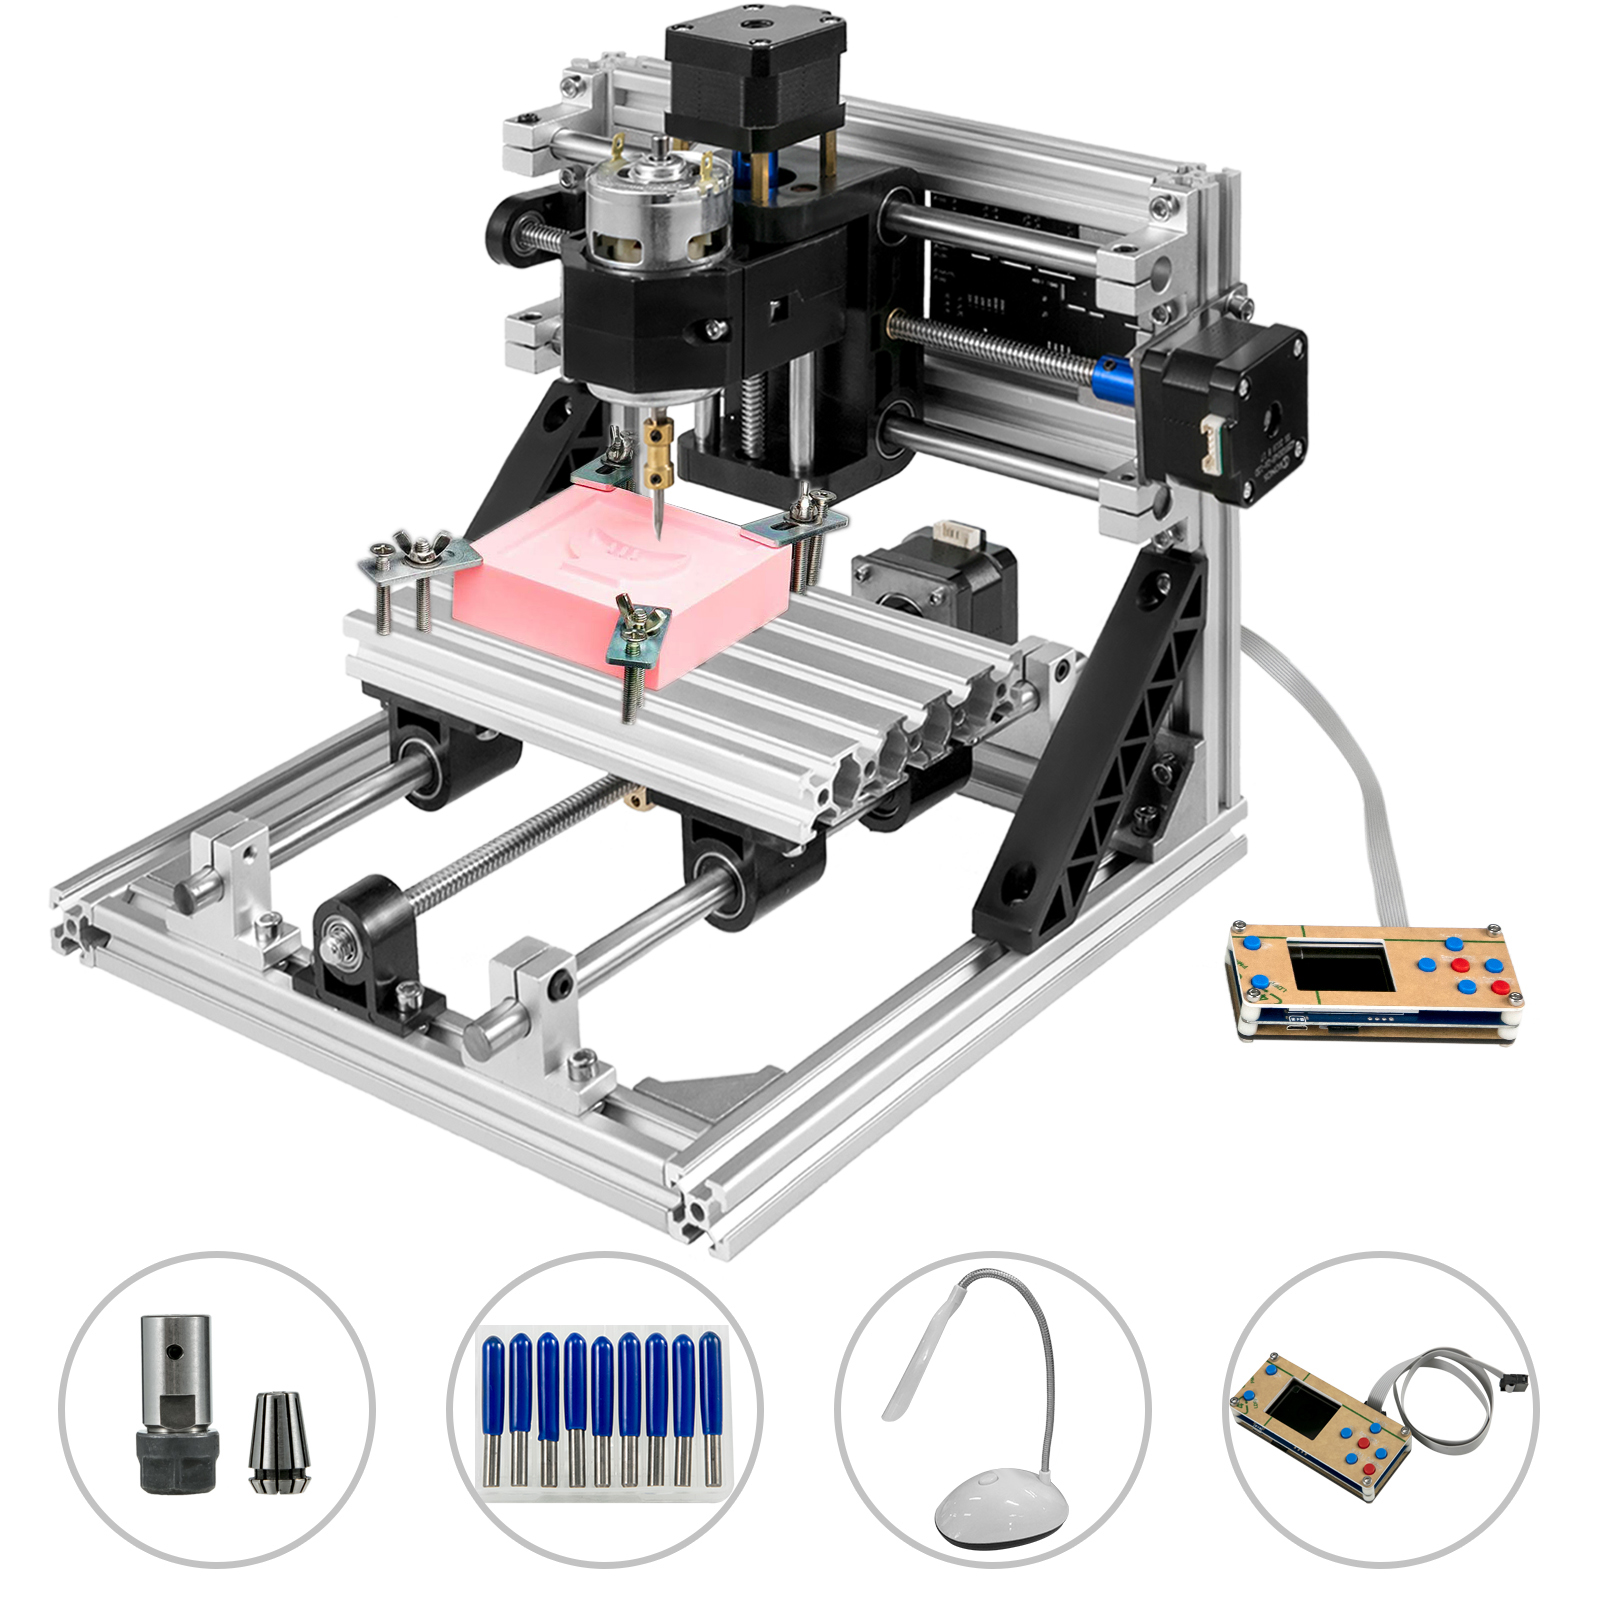 XYZ Working Area 240x180x50mm Upgrade Version CNC 2418 Router Kit GRBL Control 3 Axis Plastic Acrylic PCB PVC Wood Carving Milling Engraving Machine ER11 10PCS Router Bits CNC Router Machine 